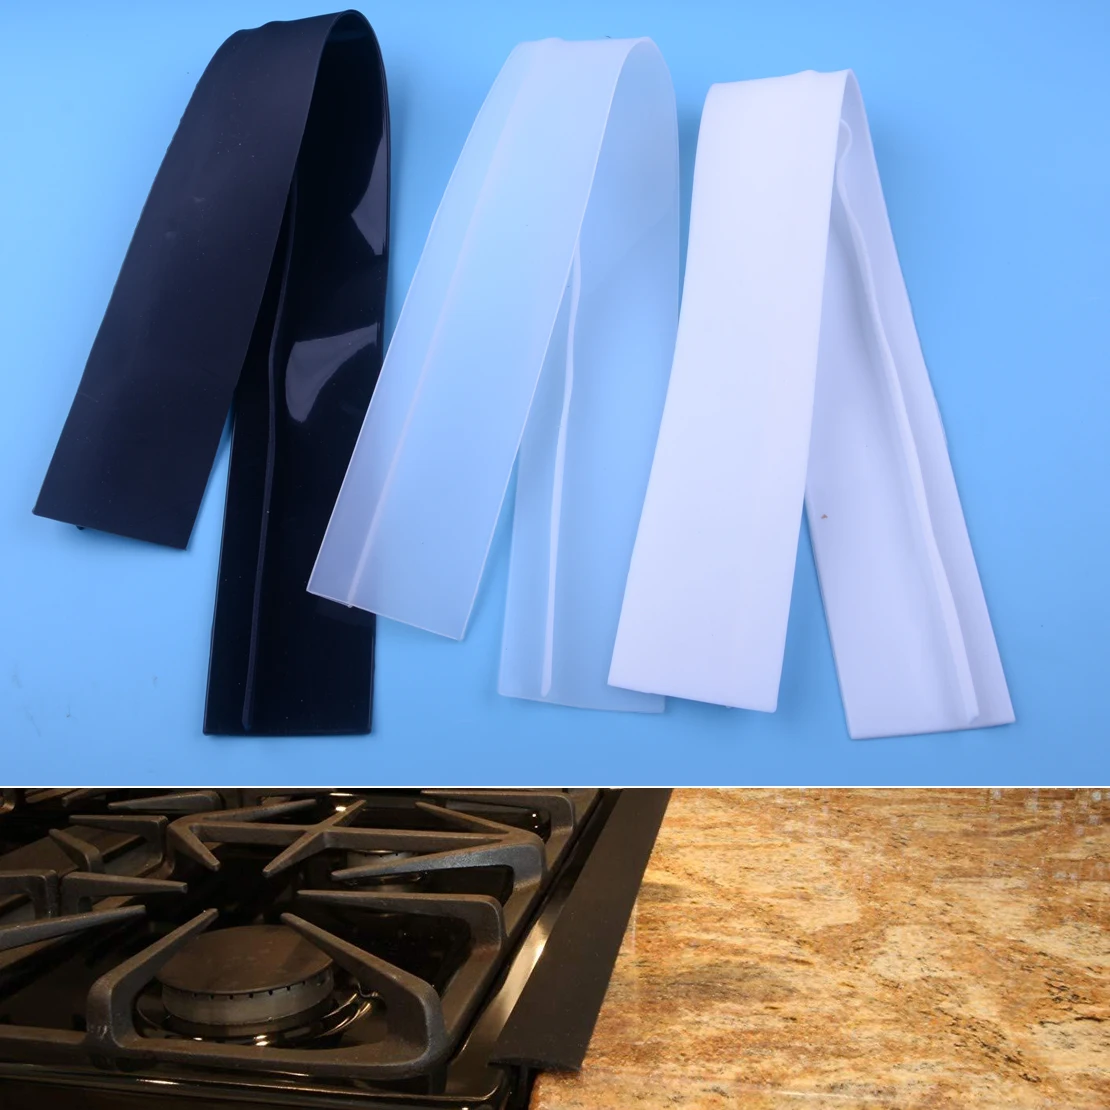 

2pcs Kitchen Silicone Stove Counter Gap Cover Filler Seals Spills Oven Heat-Resistant Oil Dust Water Seal Accessories